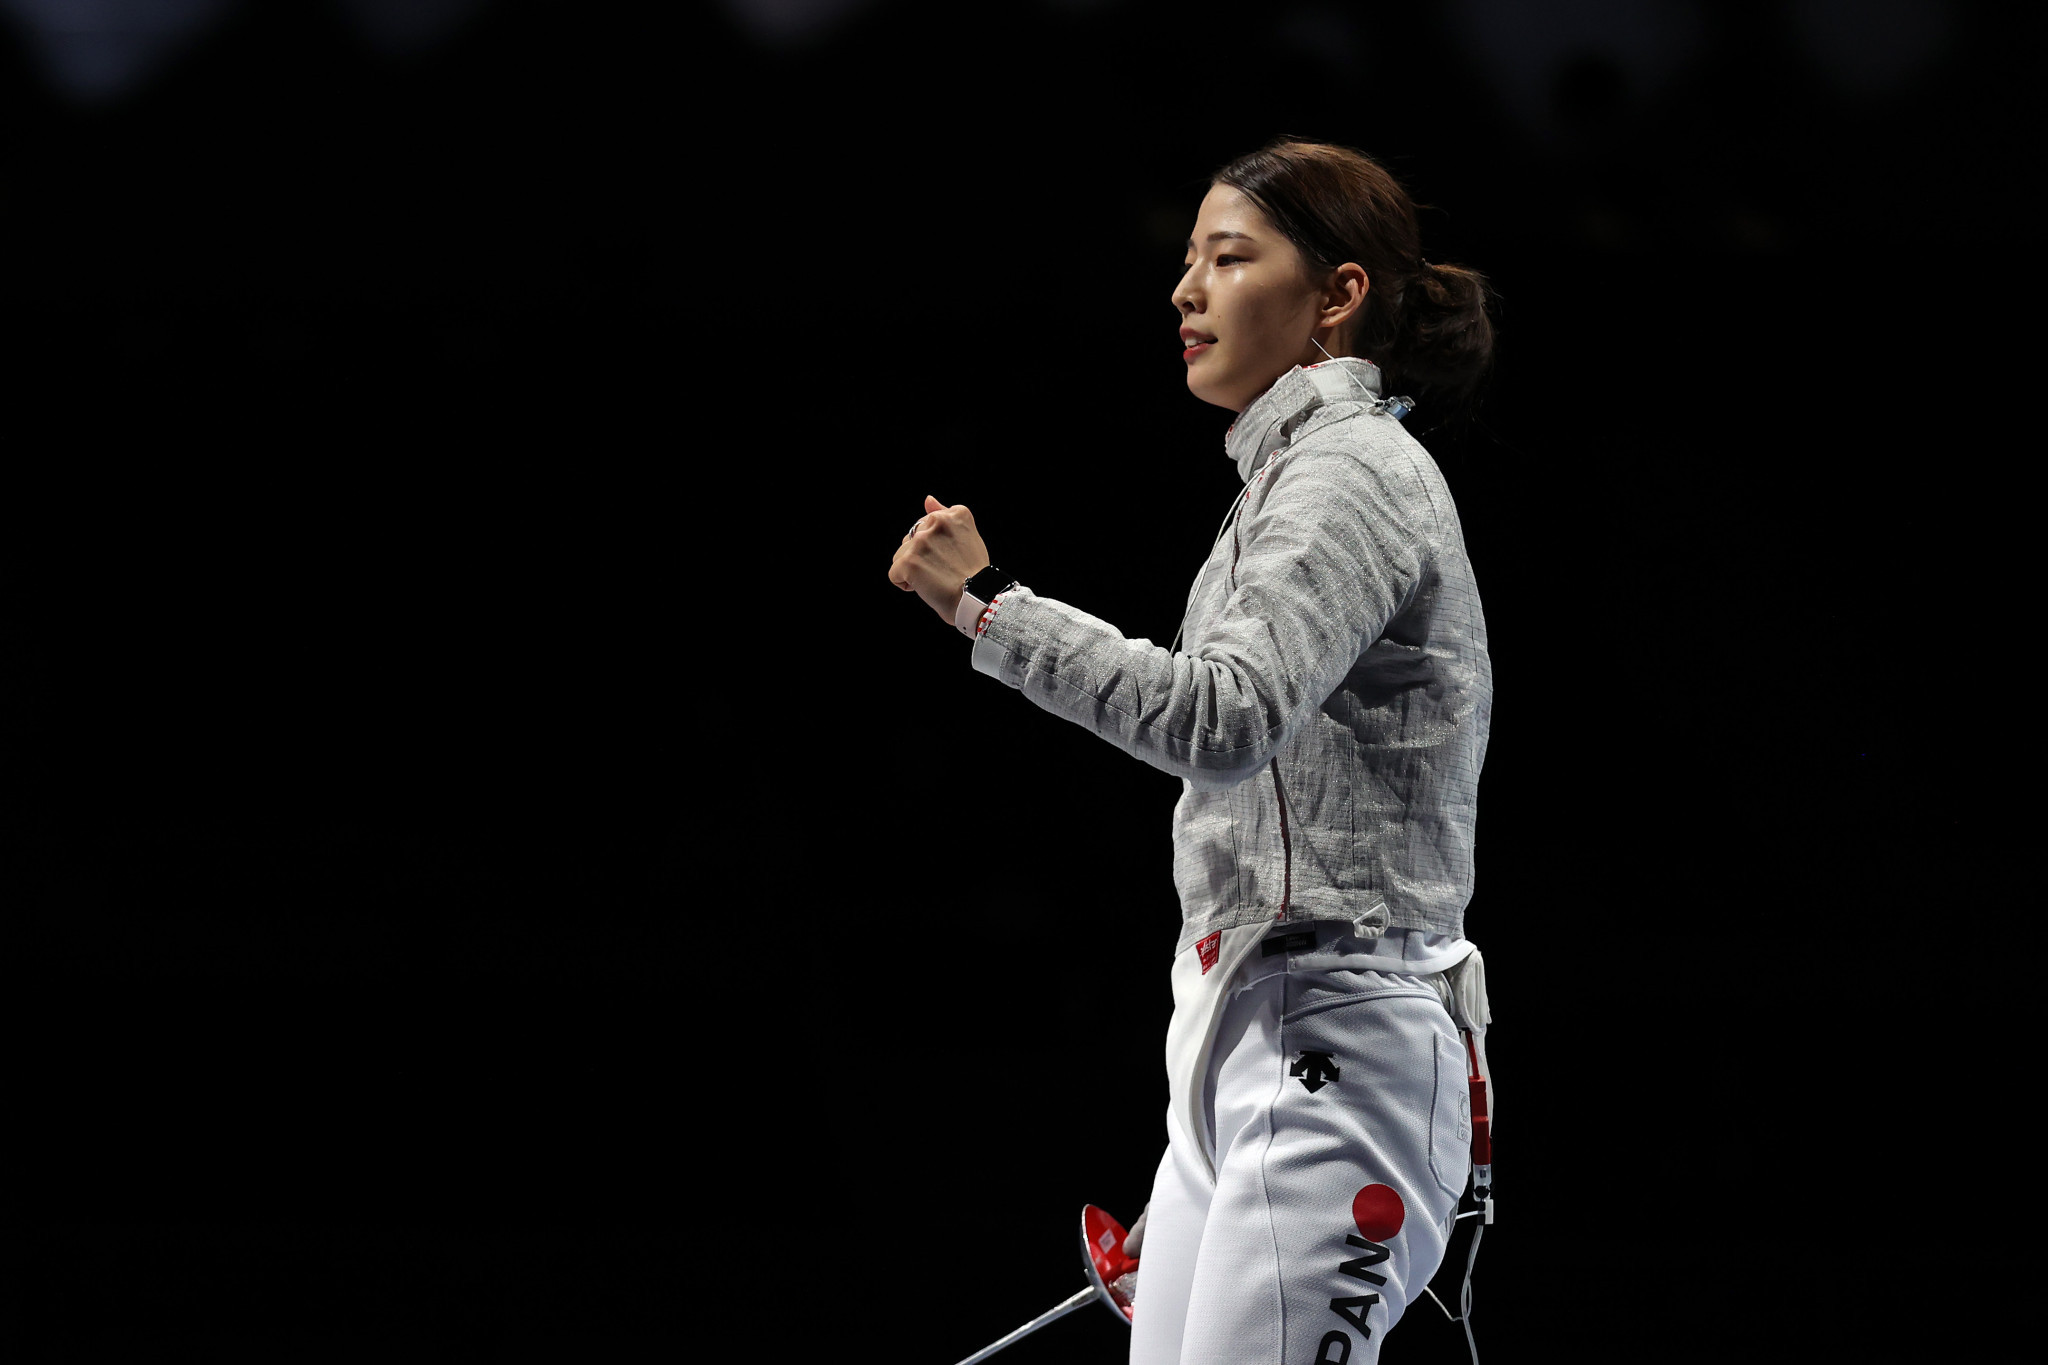 Japan's Misaki Emura became the world champion in women's sabre today ©Getty Images